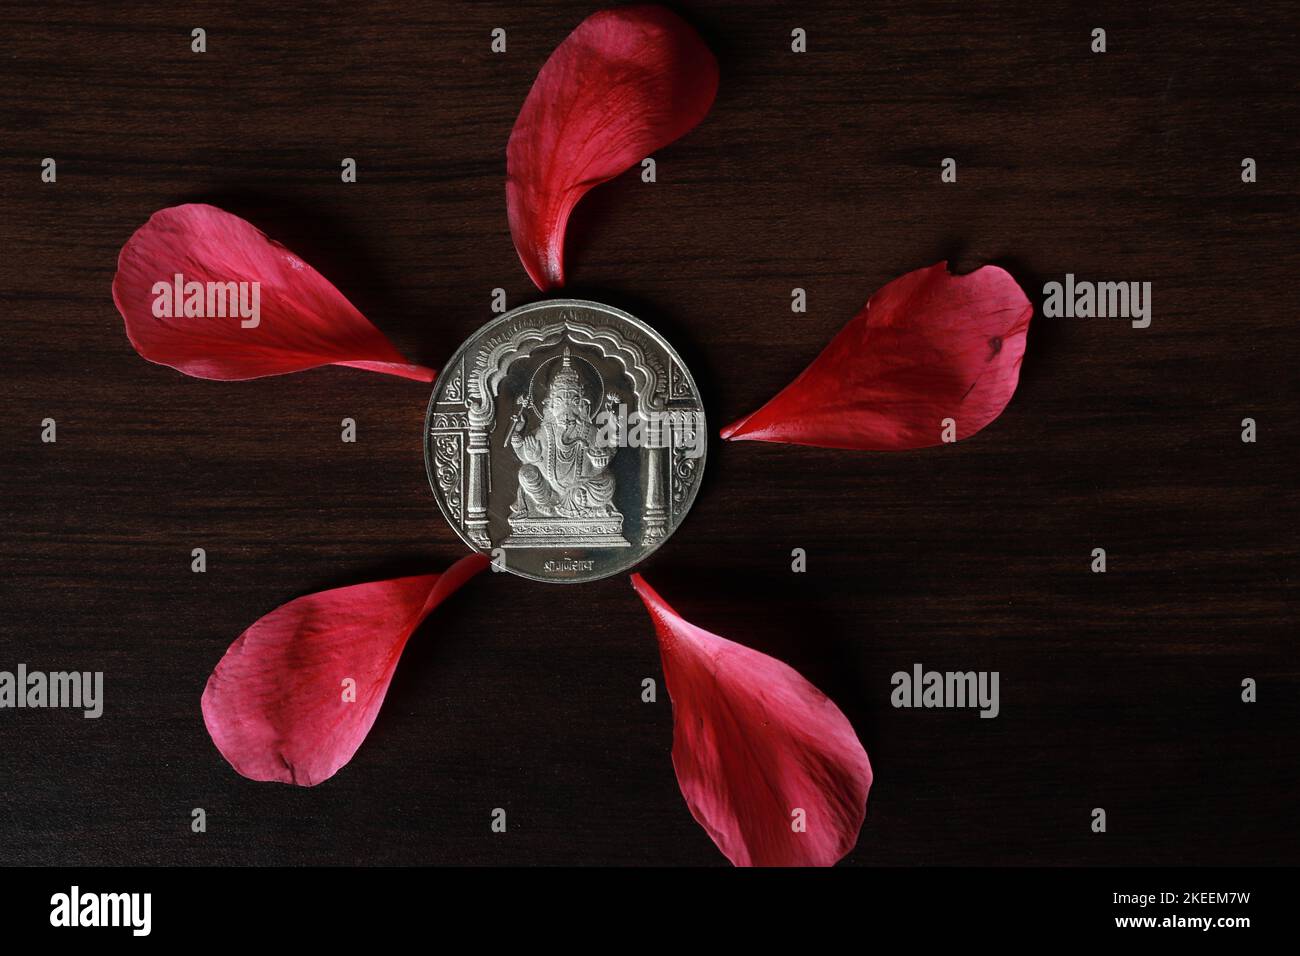 Lord Ganesha silver coin flanked by hibiscus flower petals on a wooden table/Ganesh Chaturthi Stock Photo